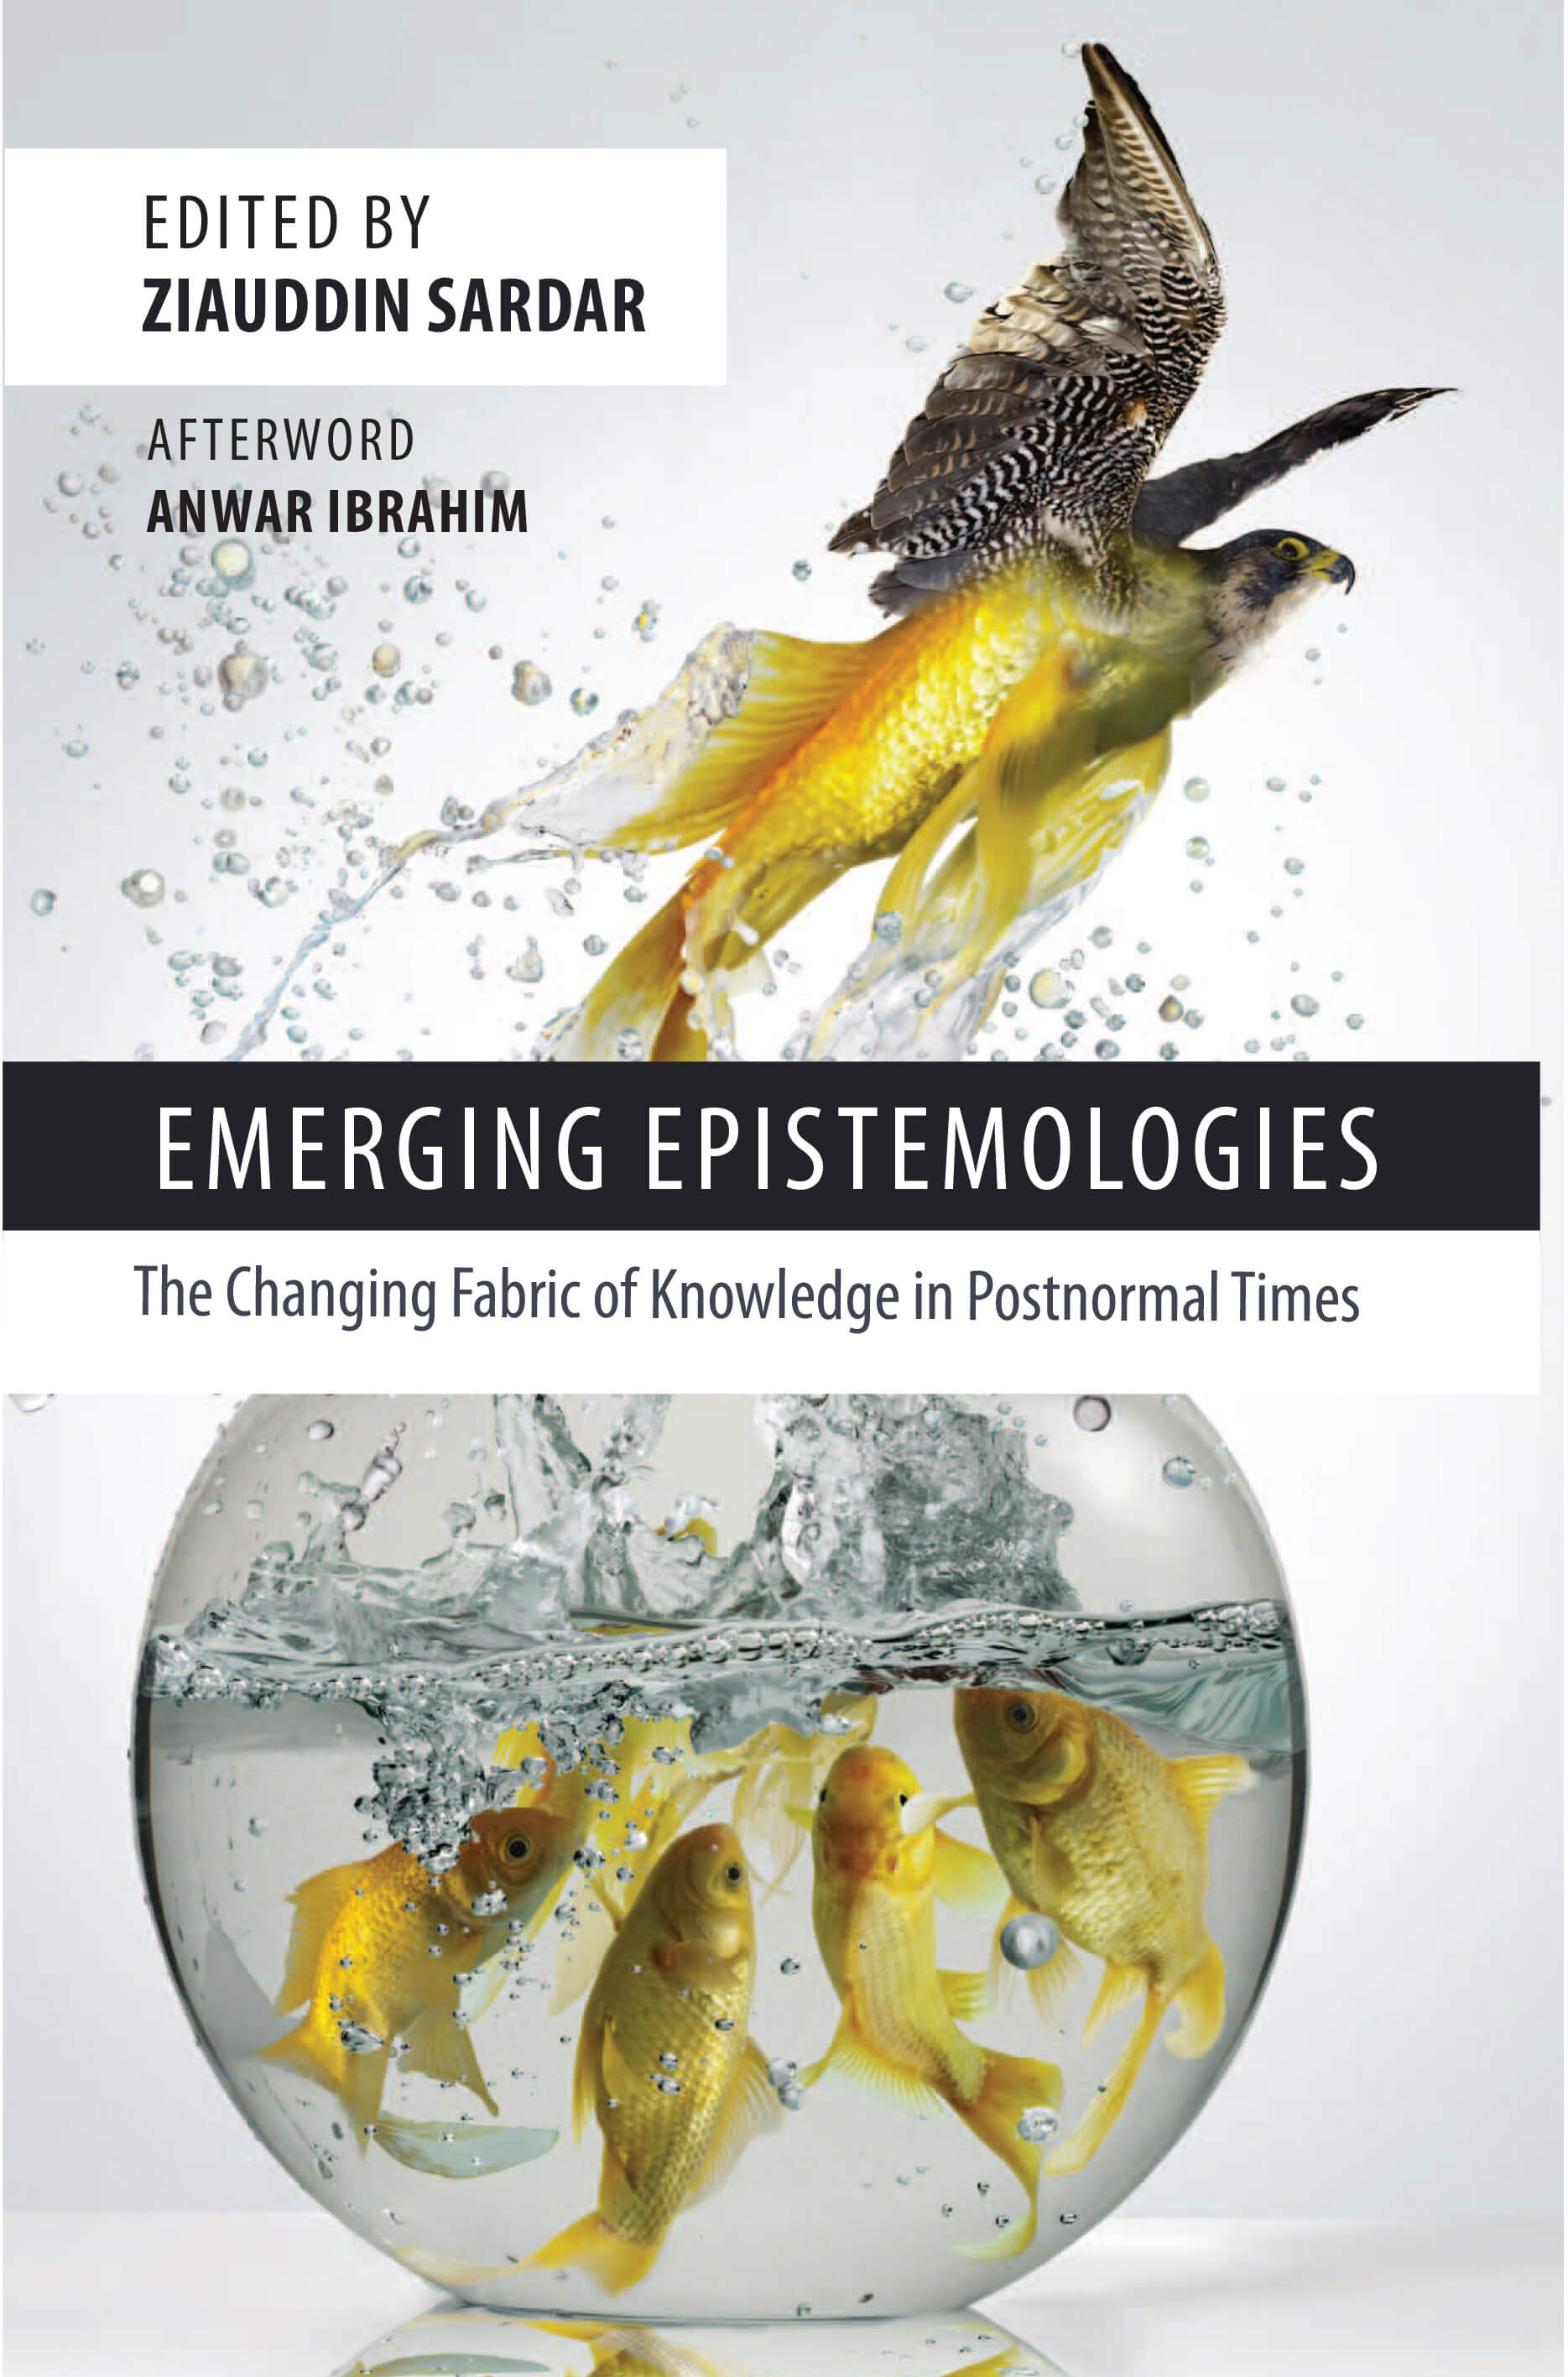 Emerging Epistemologies: The Changing Fabric of Knowledge in Postnormal Times